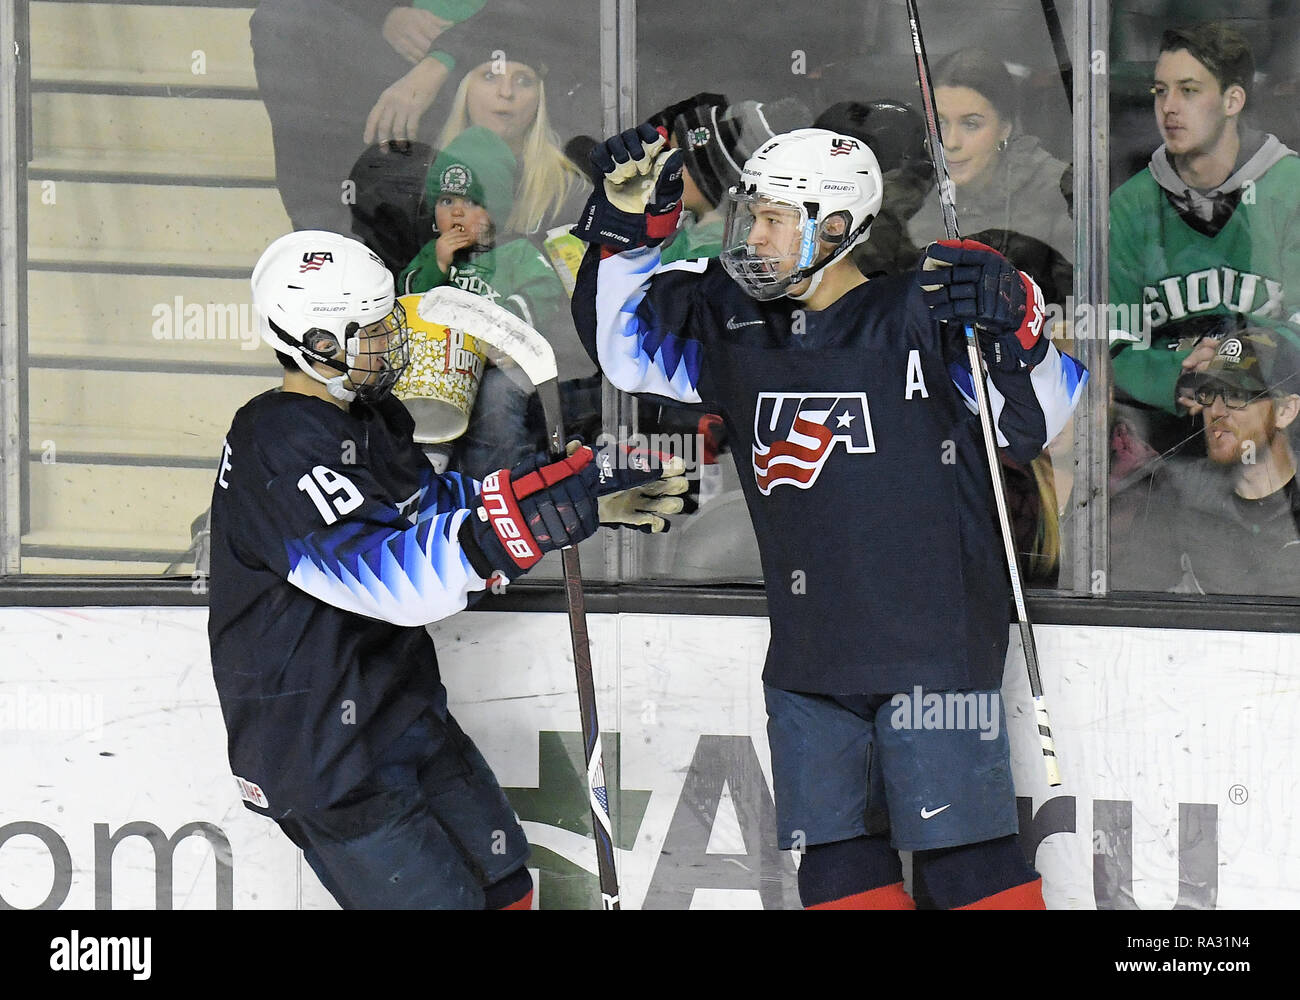 December 29, 2018 US National Under 18 team forward Alex Turcotte (19) congratulates US National Under 18 team's Matthew Boldy (9) on his goal during a exhibition men's college hockey game between the U.S. National Under-18 team and the University of North Dakota Fighting Hawks at Ralph Engelstad Arena in Grand Forks, ND. UND won 6-2. Photo by Russell Hons/CSM Stock Photo